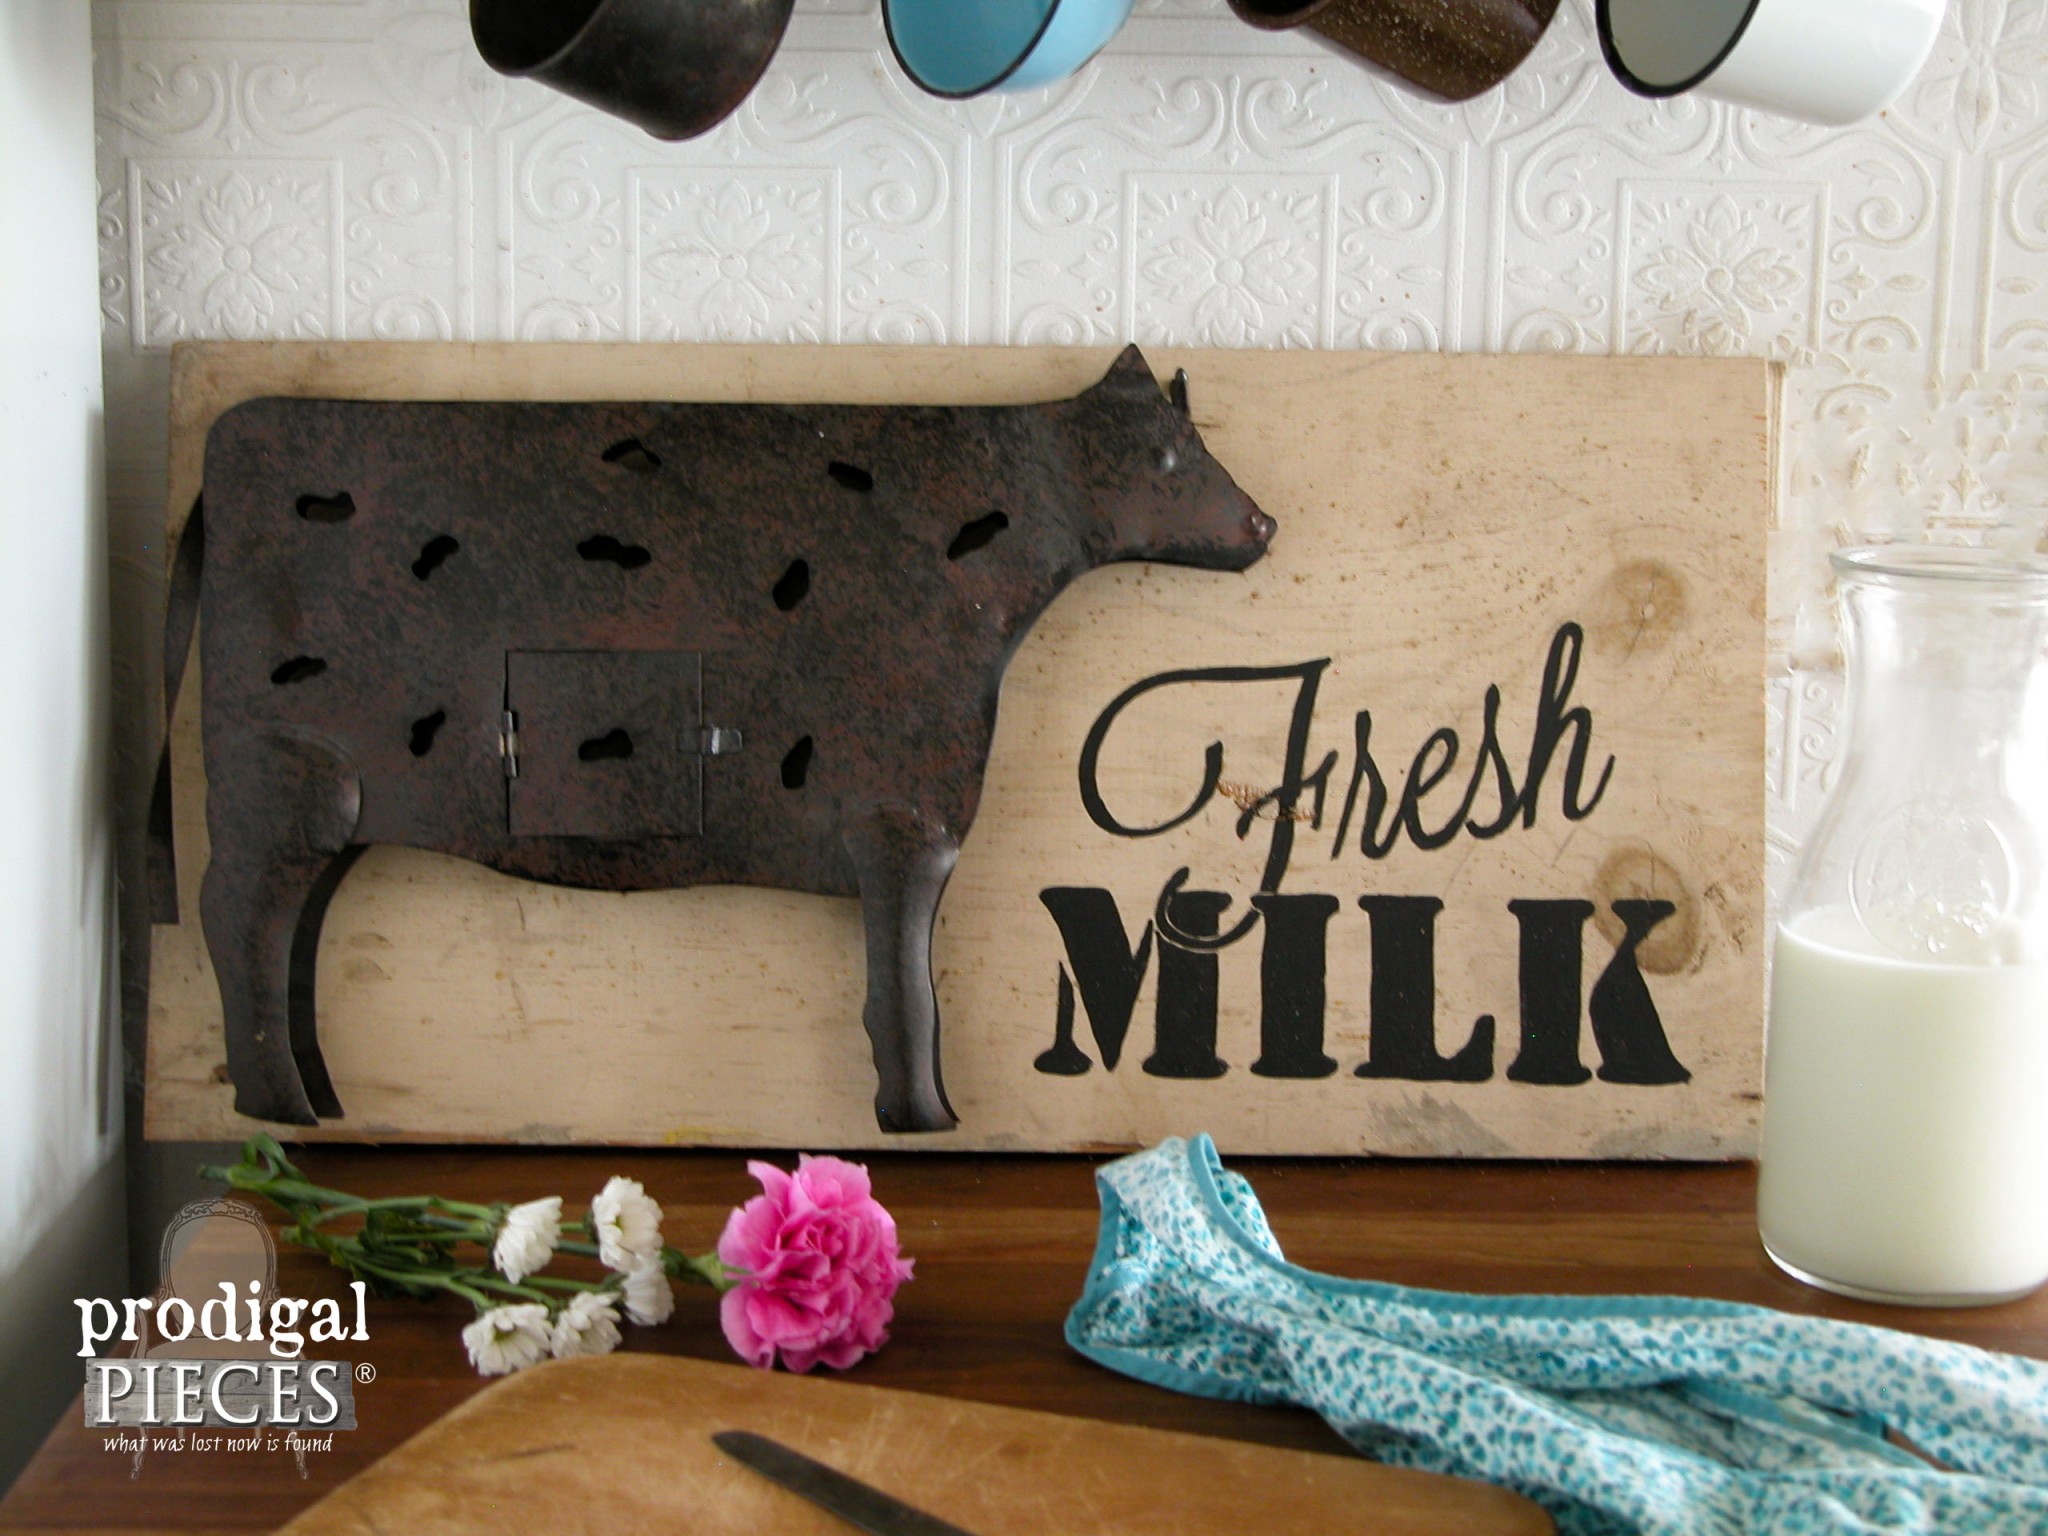 Rustic Farmhouse Fresh Milk Sign Metal Art from Reclaimed Finds by Prodigal Pieces | www.prodigalpieces.com